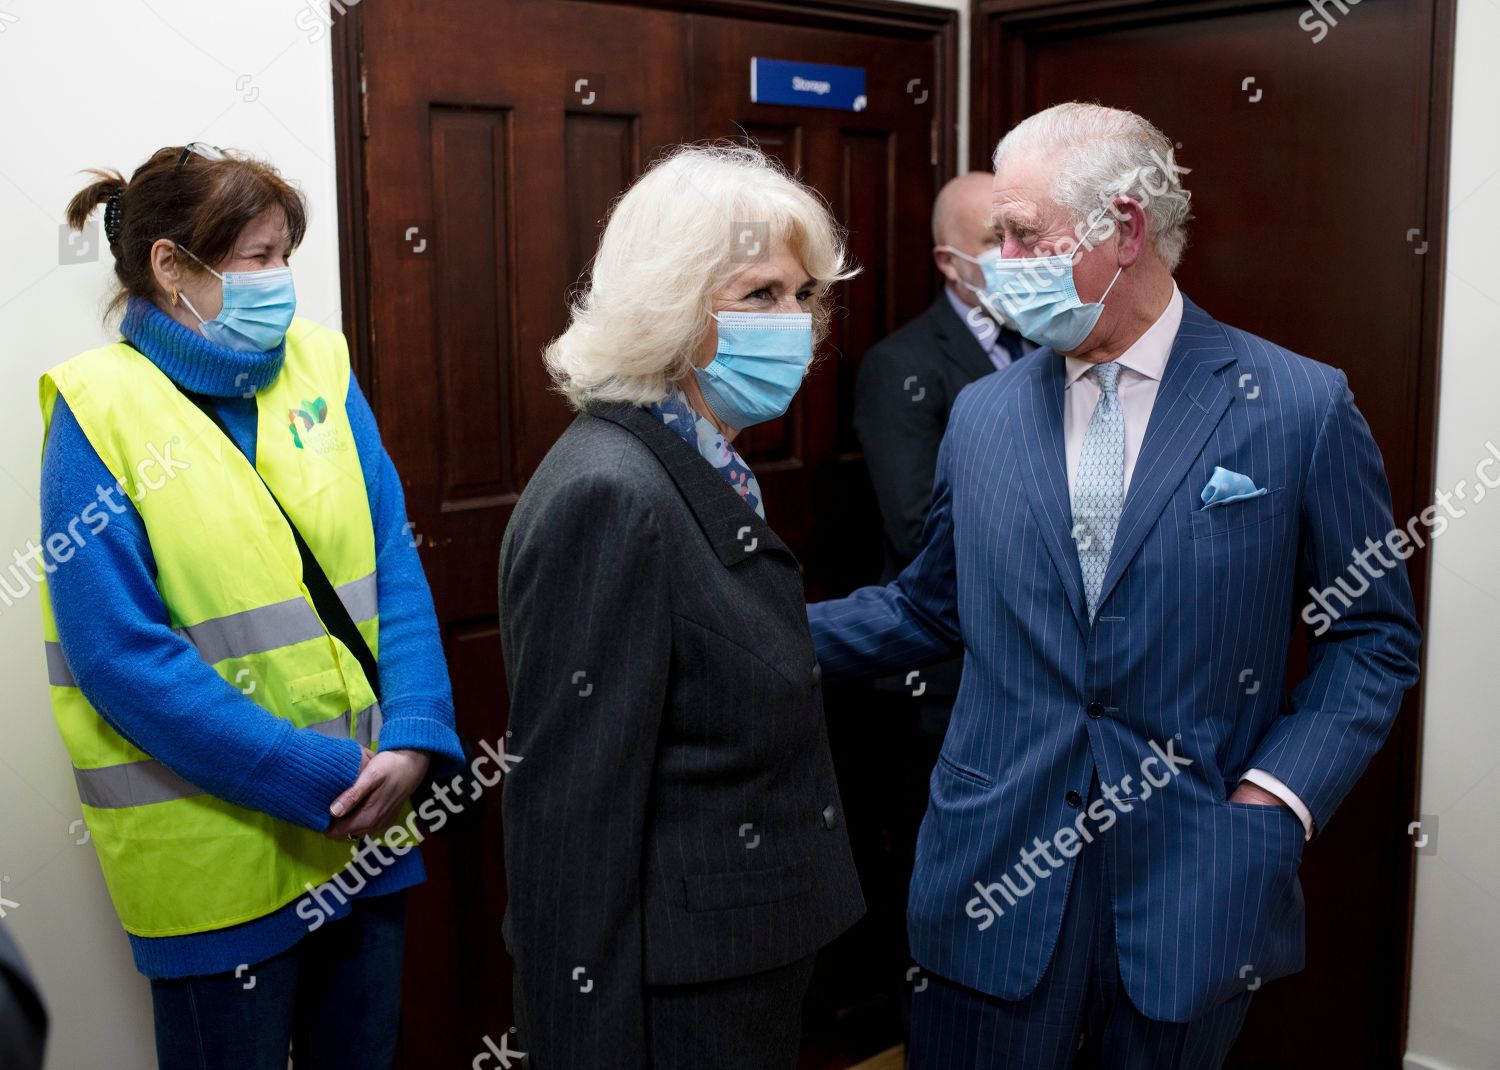 prince-charles-and-camilla-duchess-of-cornwall-visit-vaccination-pop-up-centre-at-finsbury-park-mosque-london-uk-shutterstock-editorial-11802378q.jpg